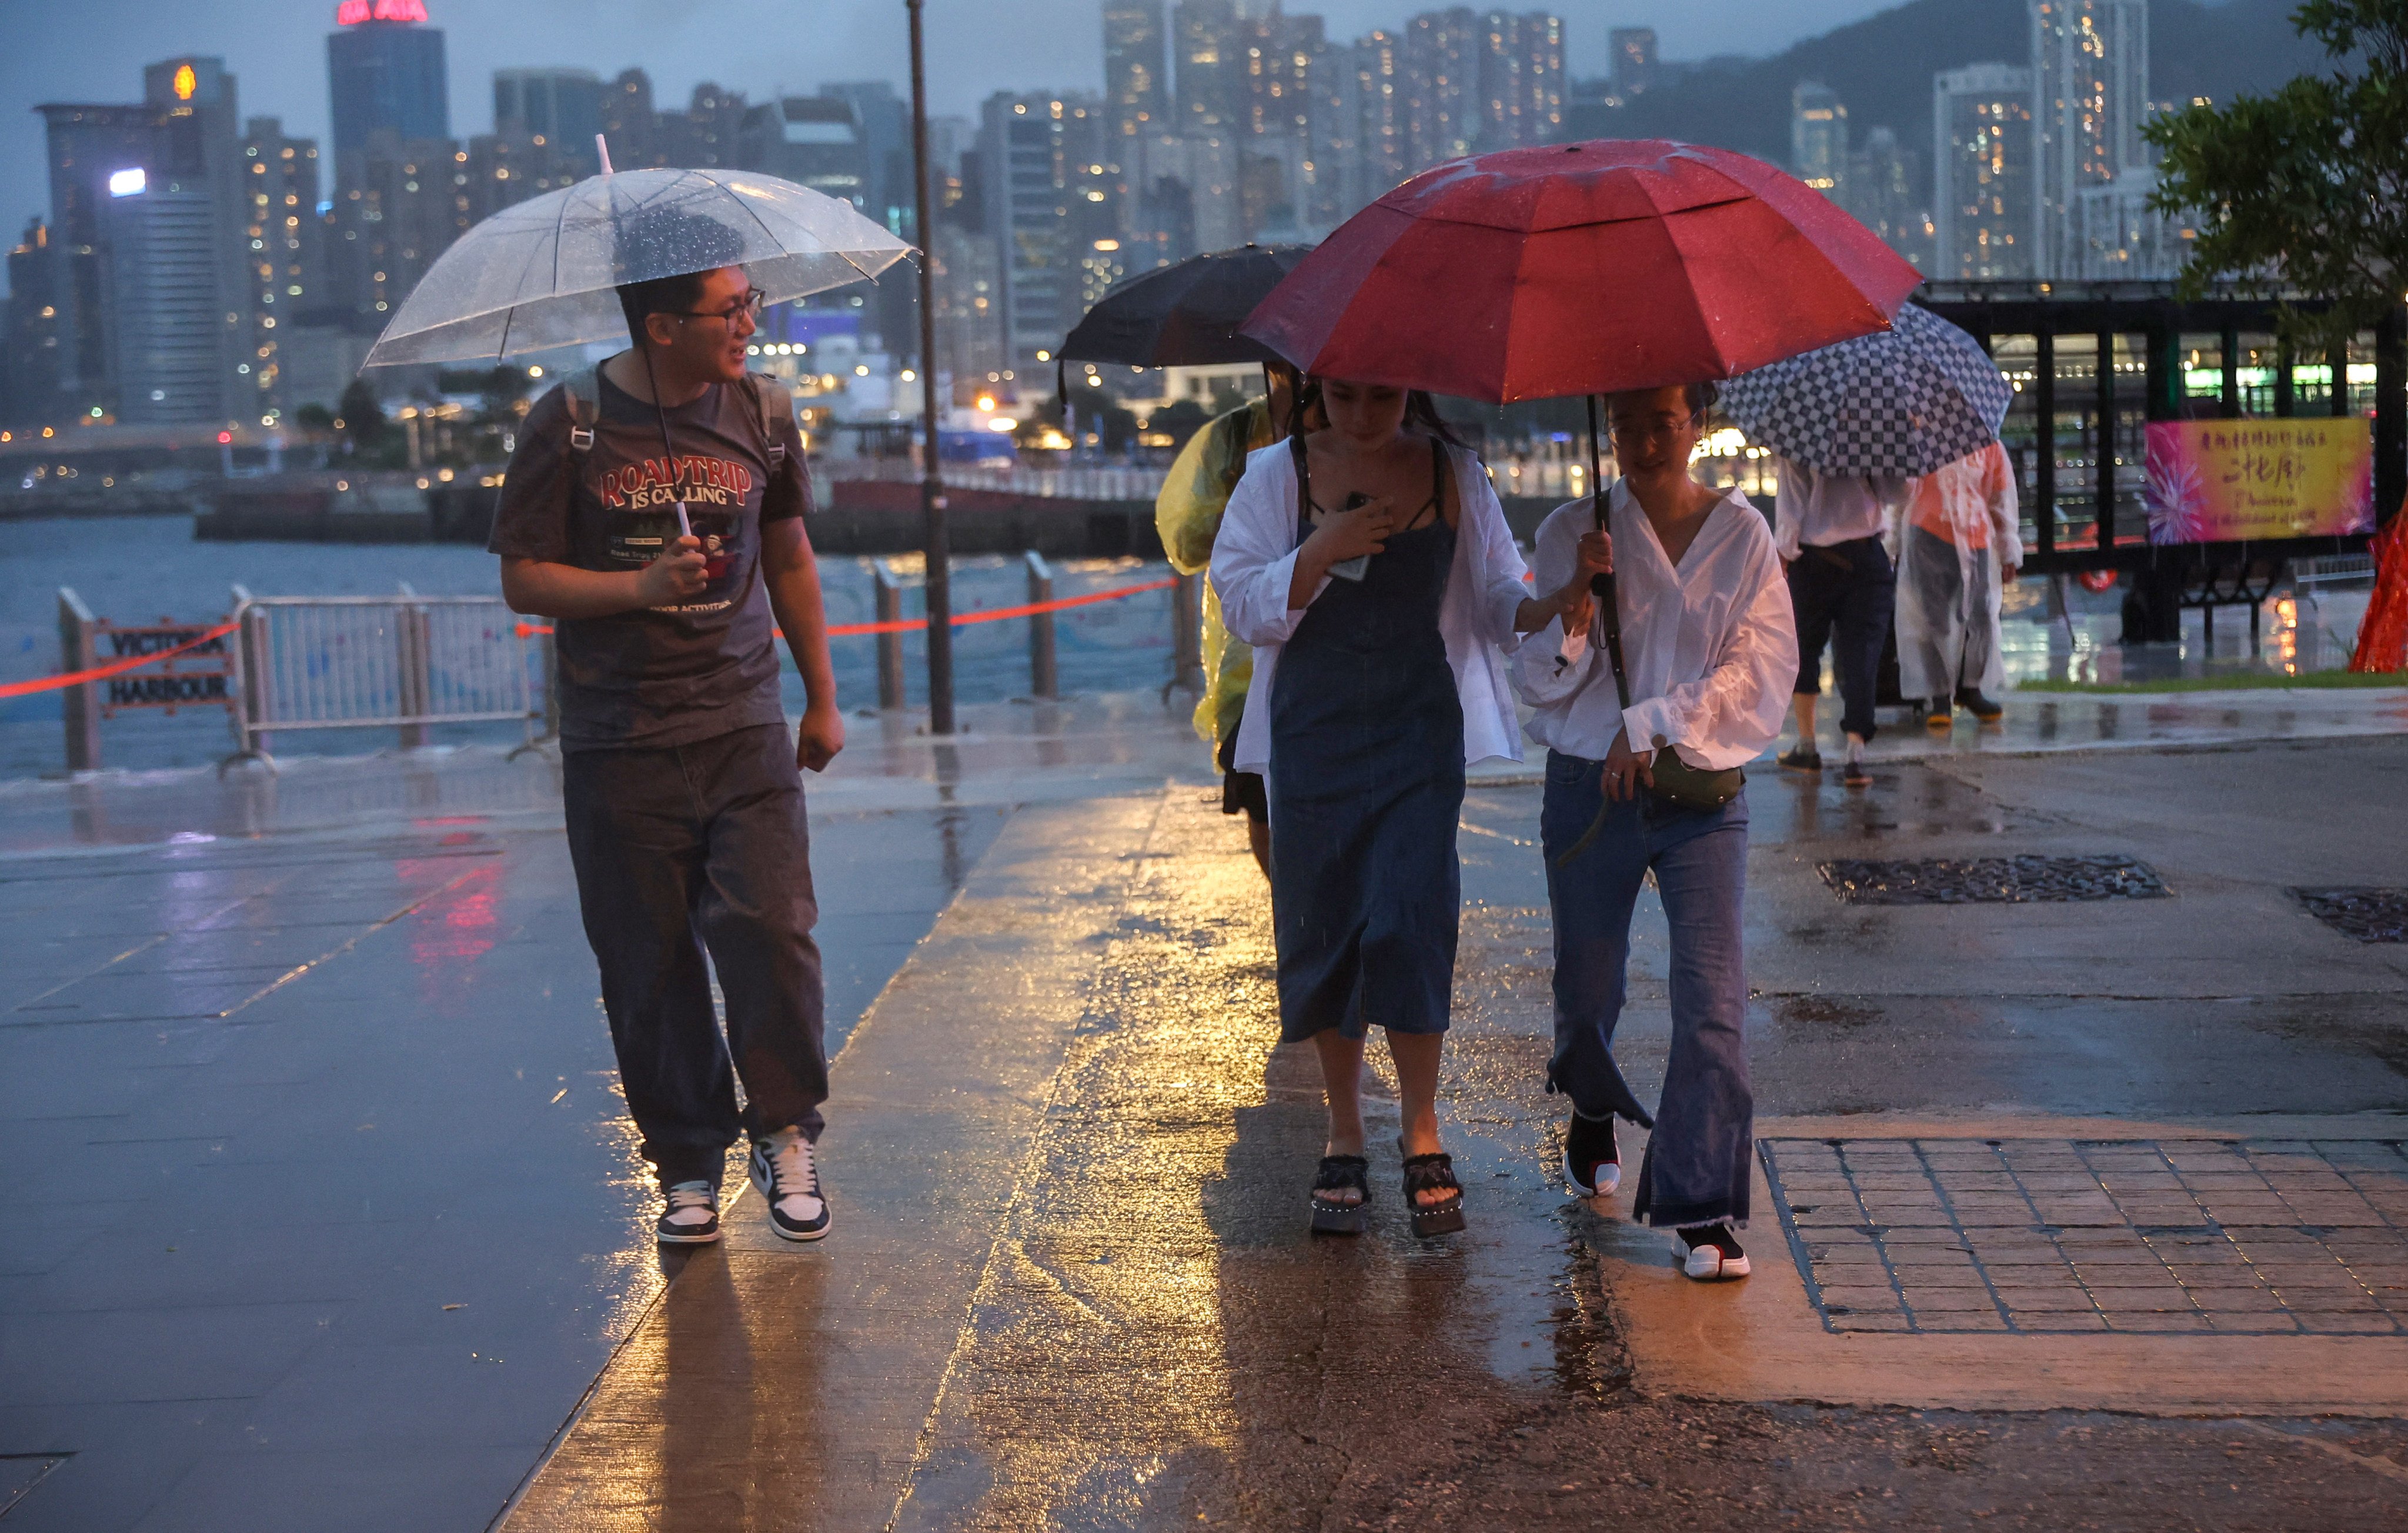 Around 100 people had gathered along Wan Chai waterfront for the show before it was cancelled. Photo: Edmond So